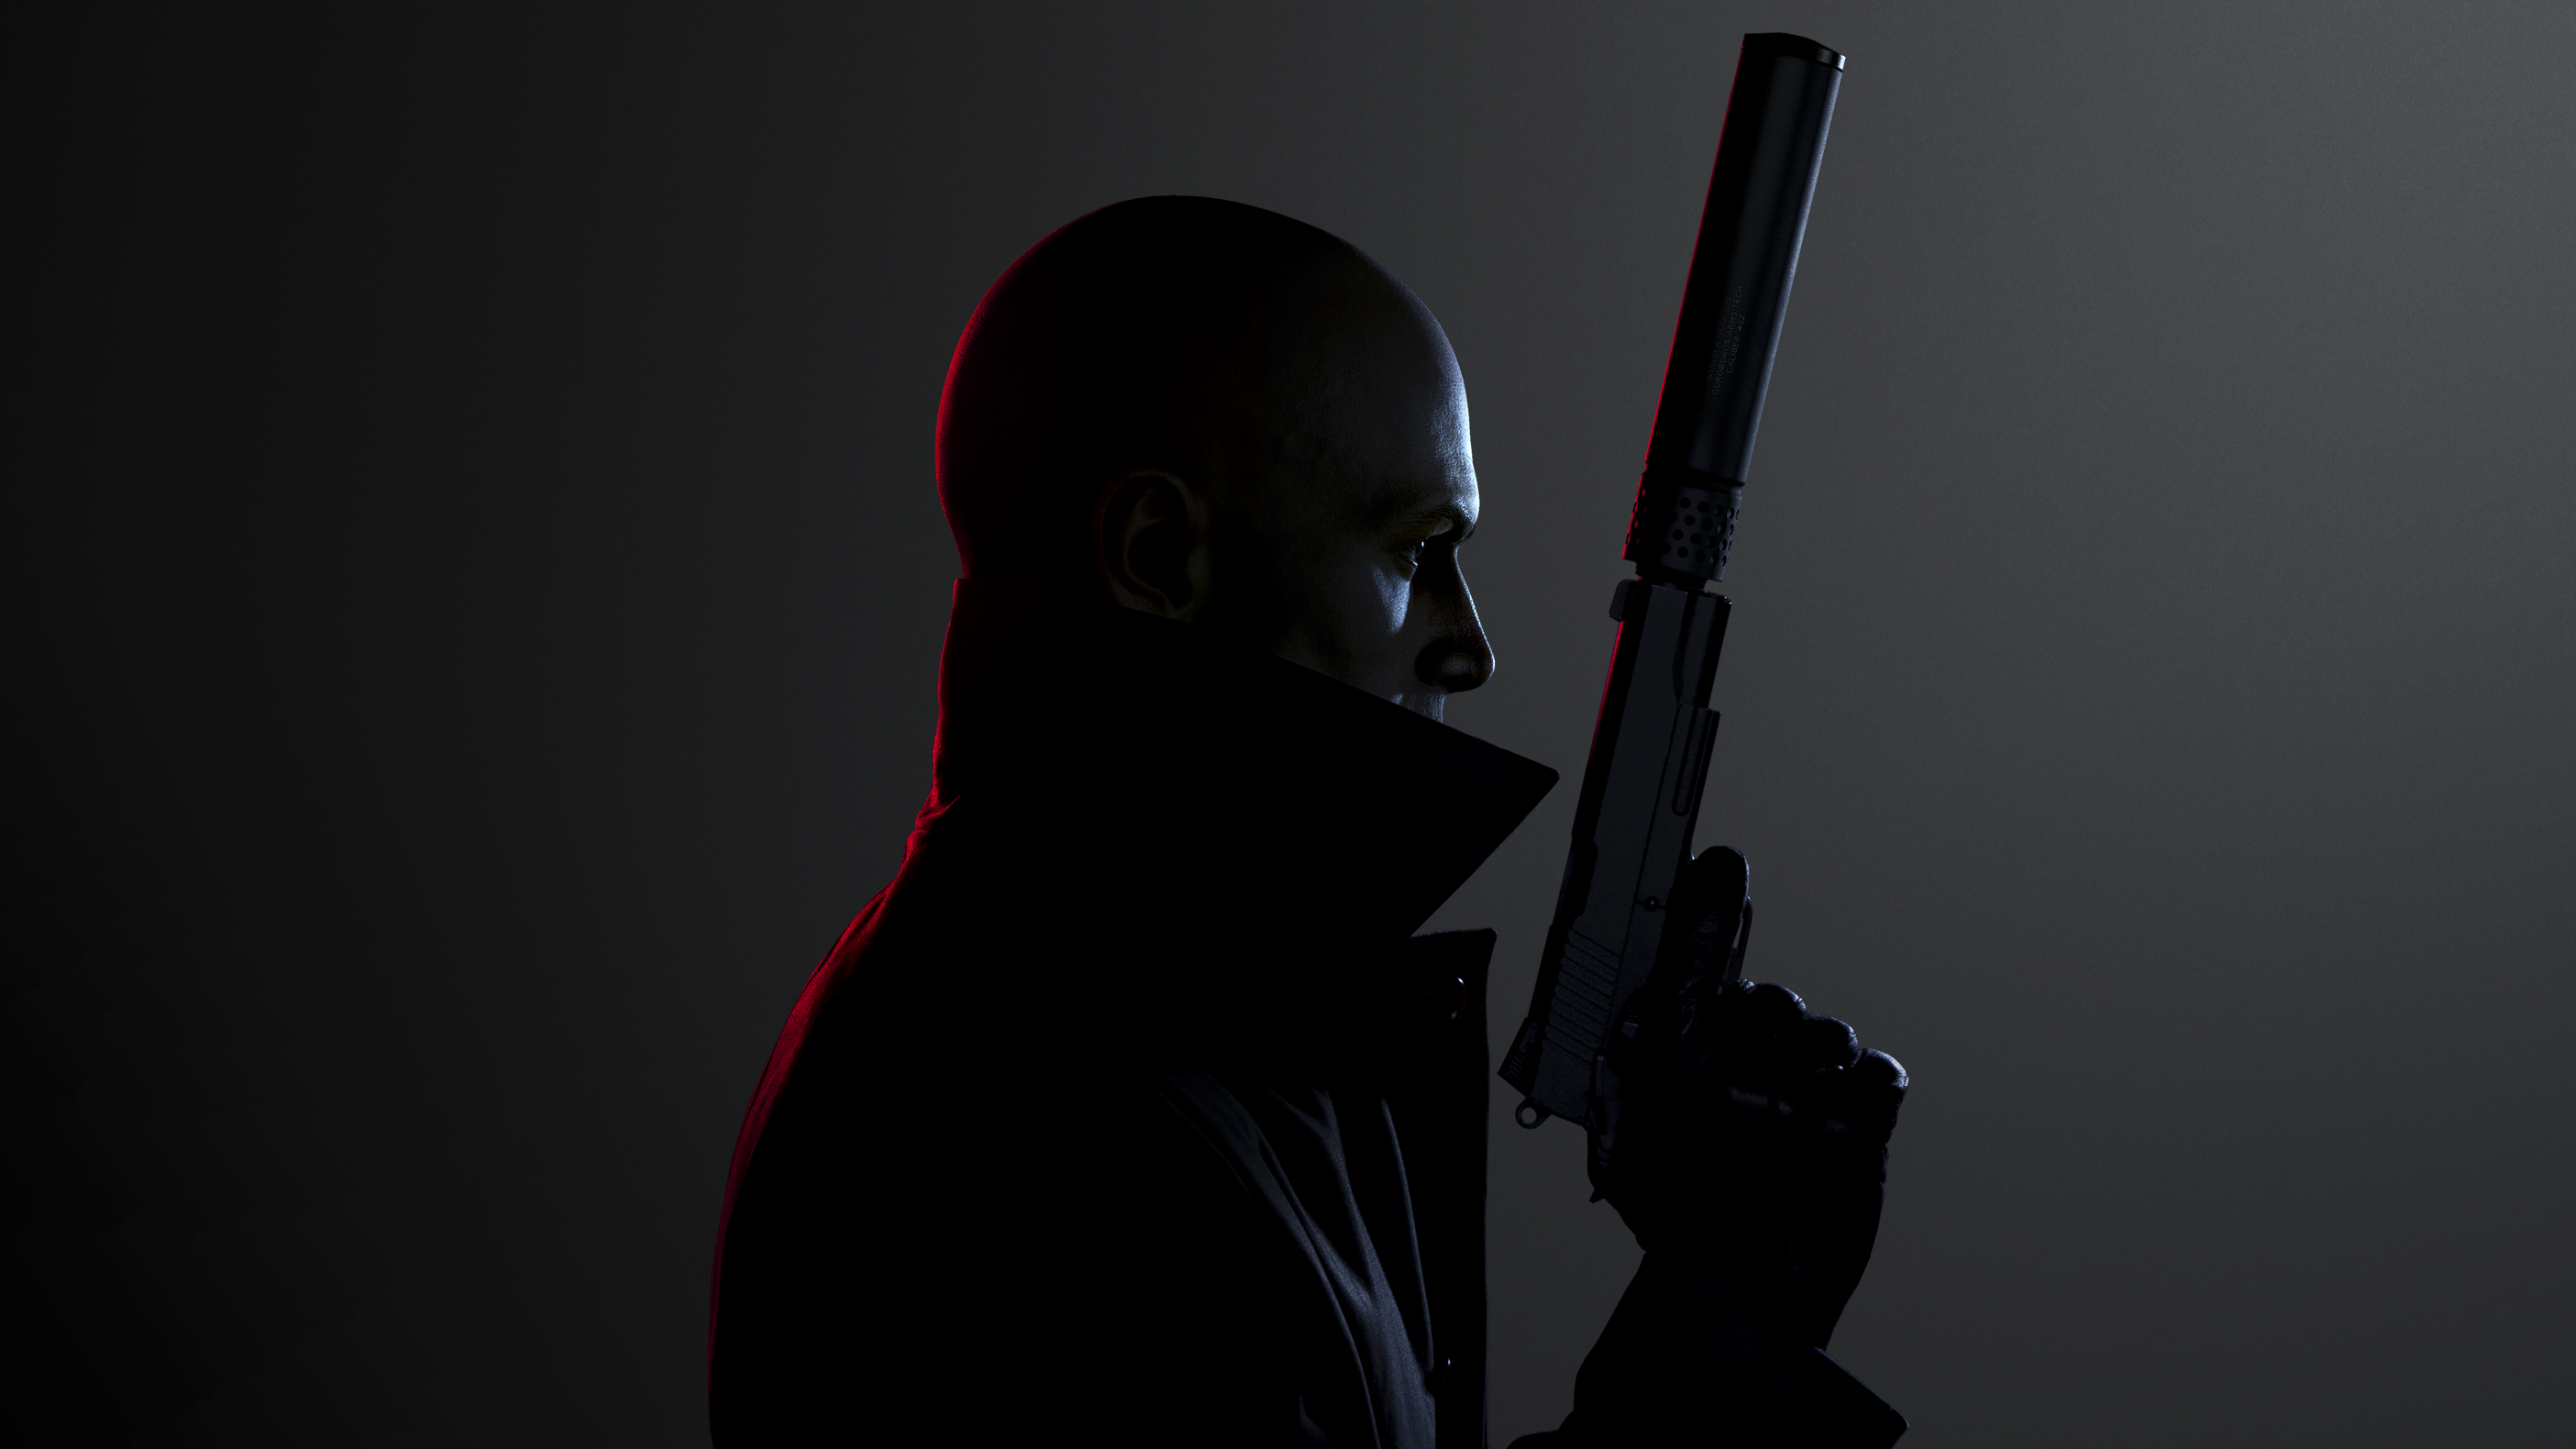 Hitman 3 key art featuring main character Agent 47 in profile holding a silenced pistol.